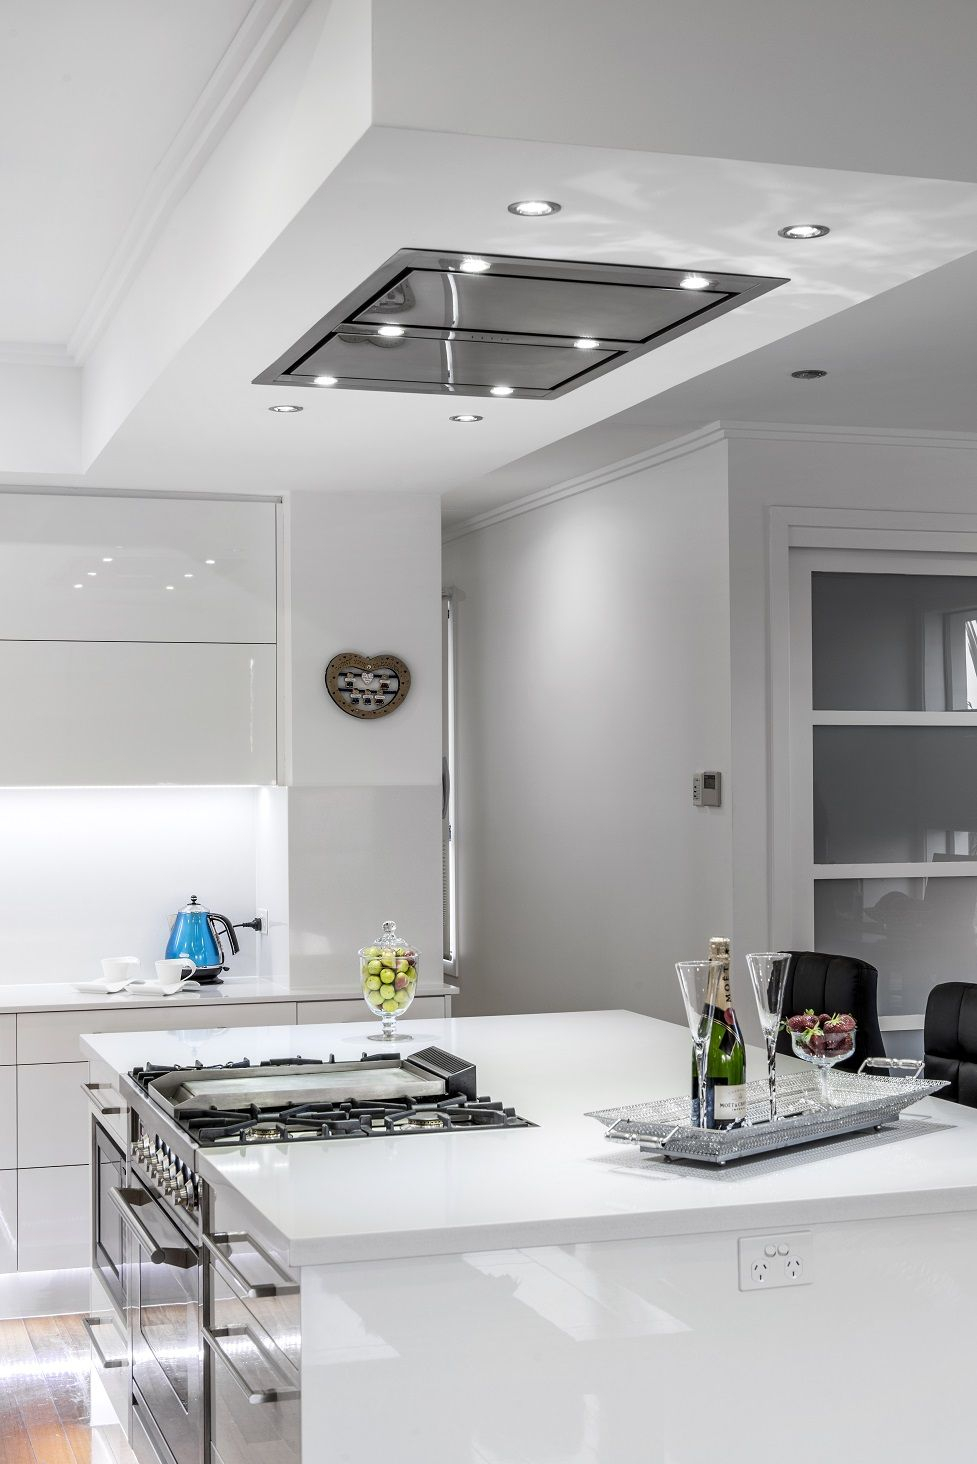 Ceiling And Casette Rangehoods The Alternative To intended for sizing 977 X 1464